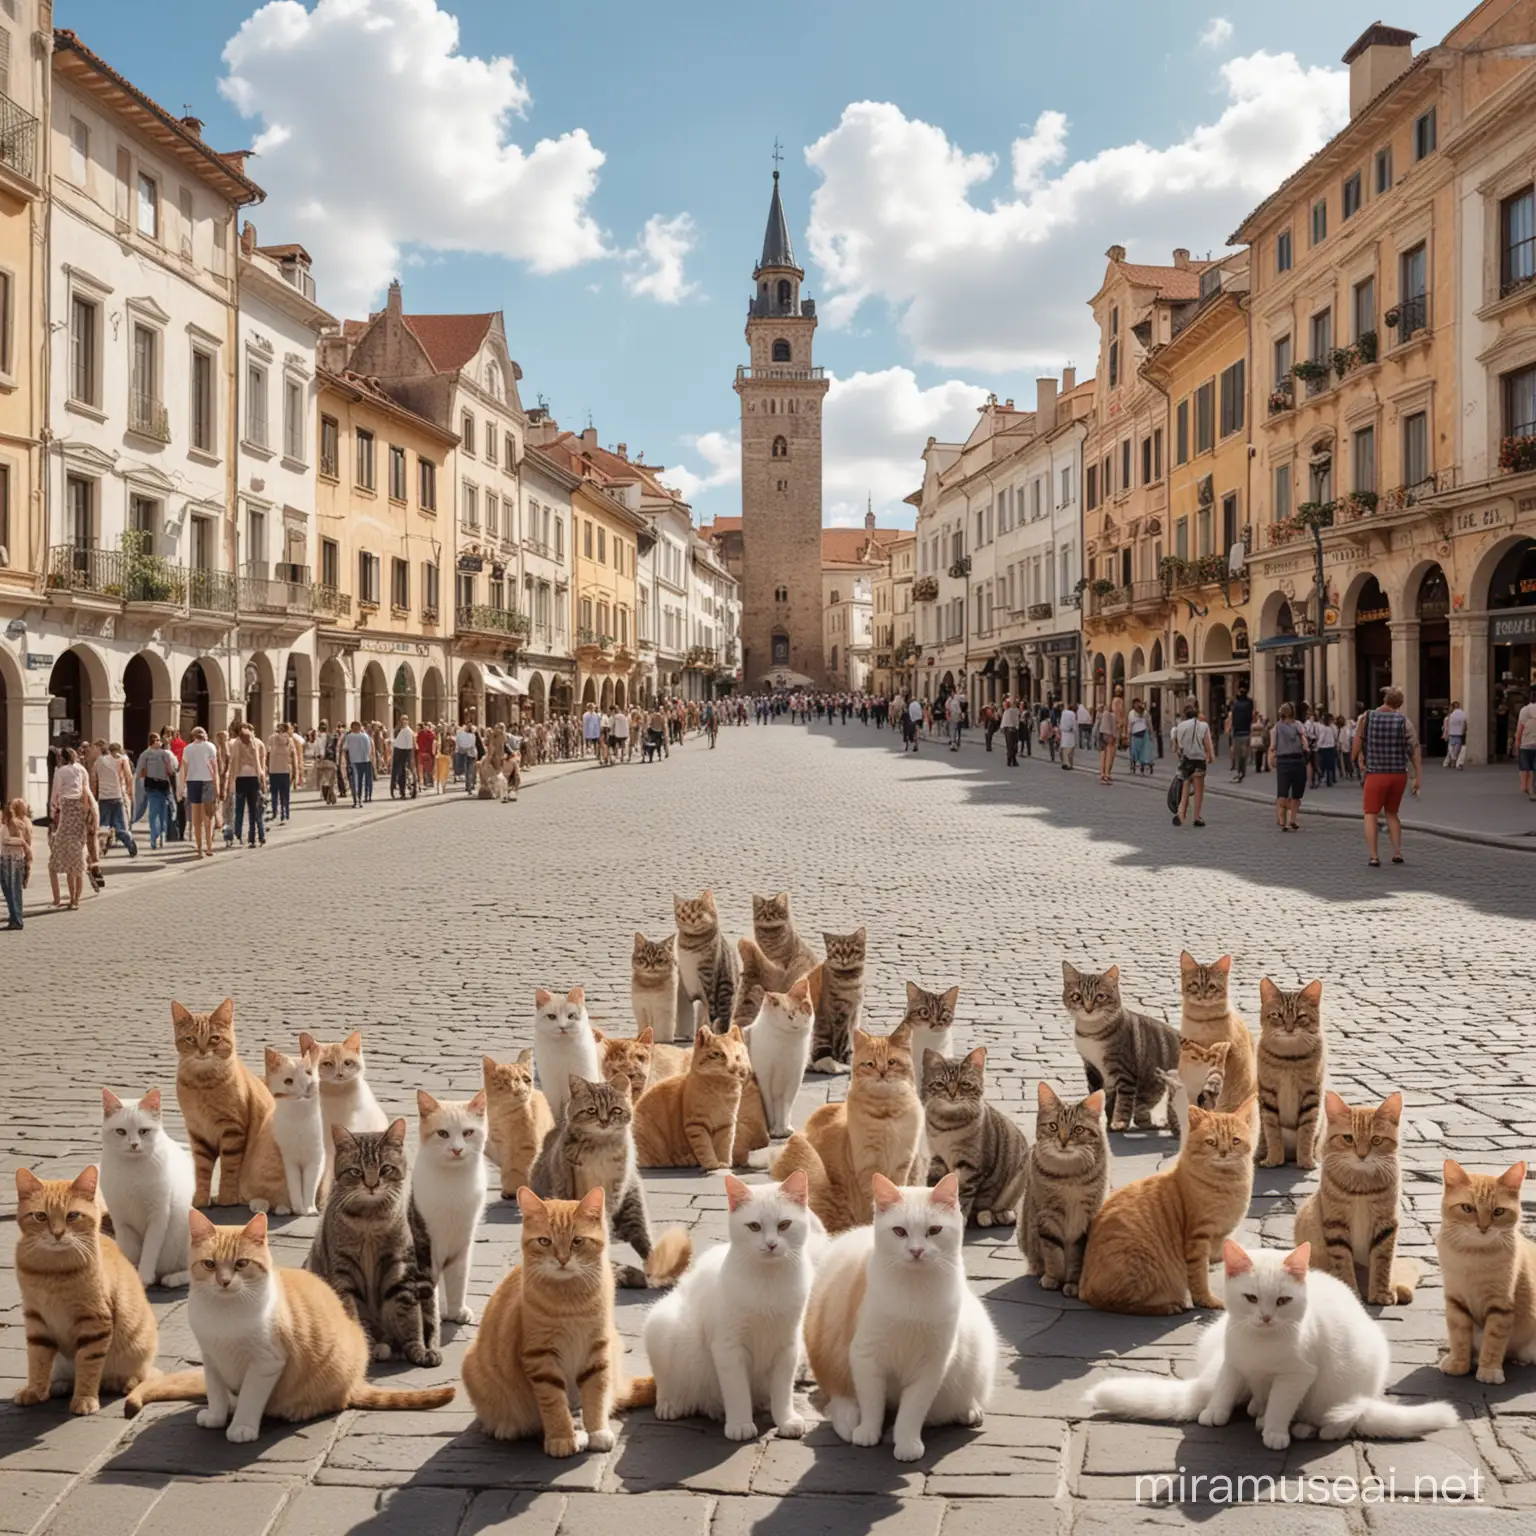 create a tourist picture from the town square of a country with lots of cats